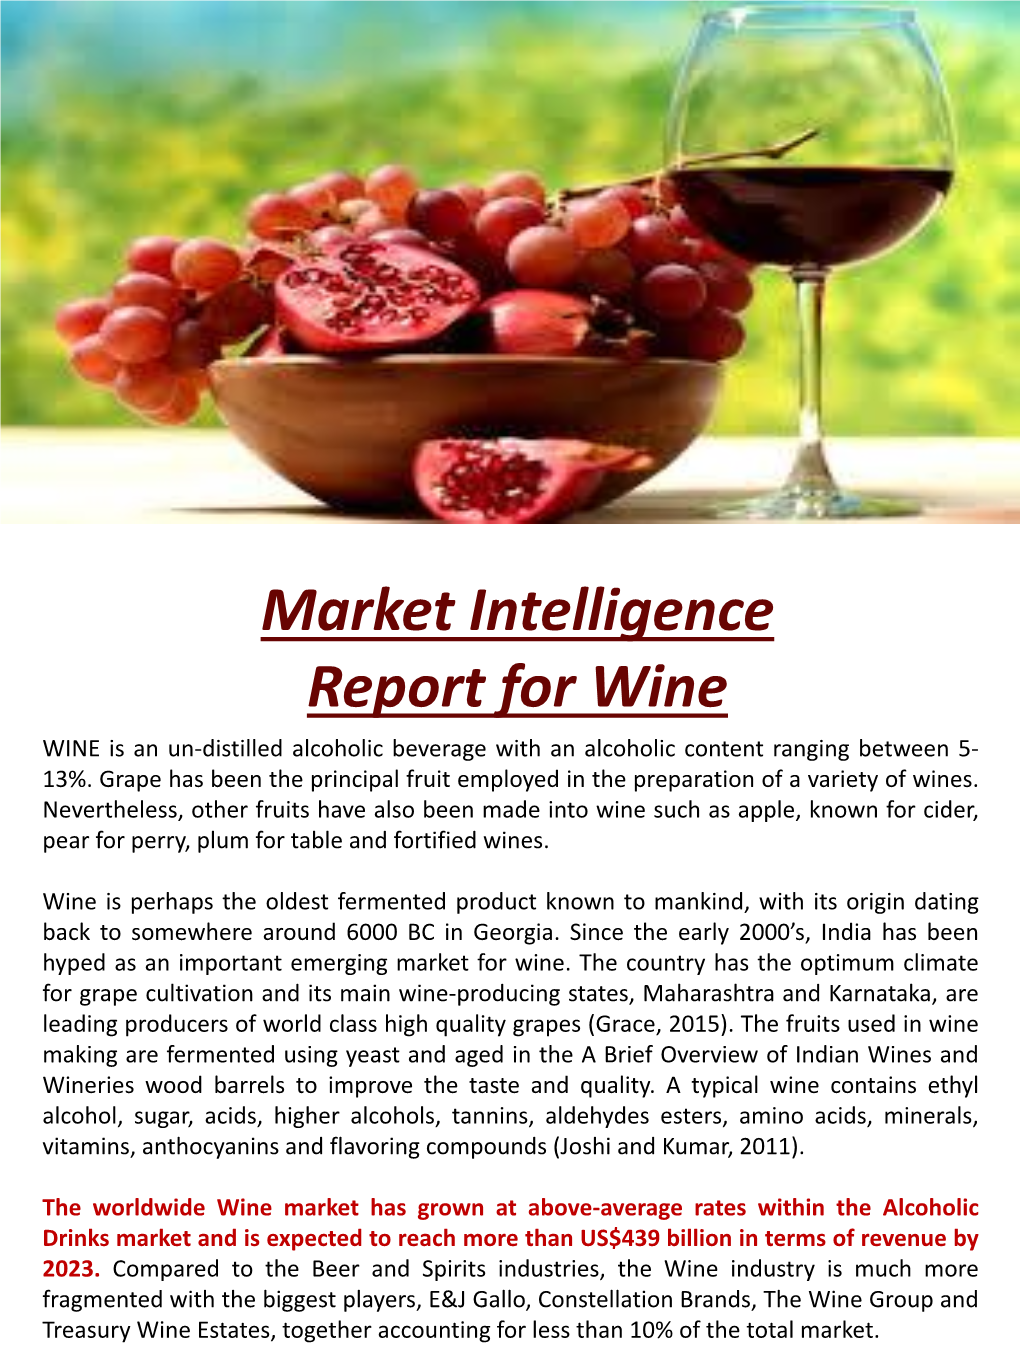 Market Intelligence Report for Wine WINE Is an Un-Distilled Alcoholic Beverage with an Alcoholic Content Ranging Between 5- 13%